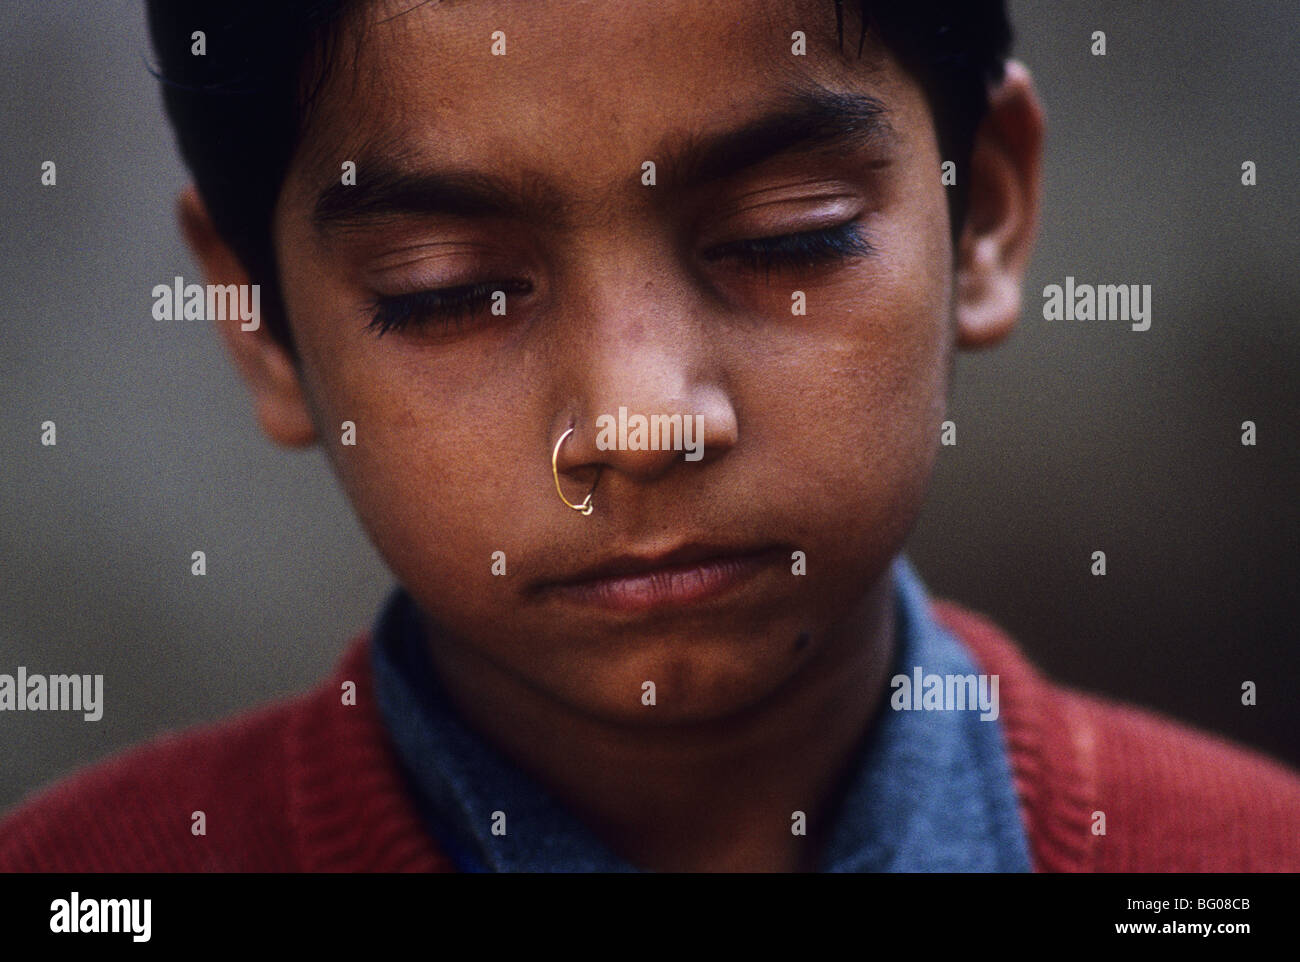 Portrait of a young Indian boy with nose ring, Bangalore, India ...